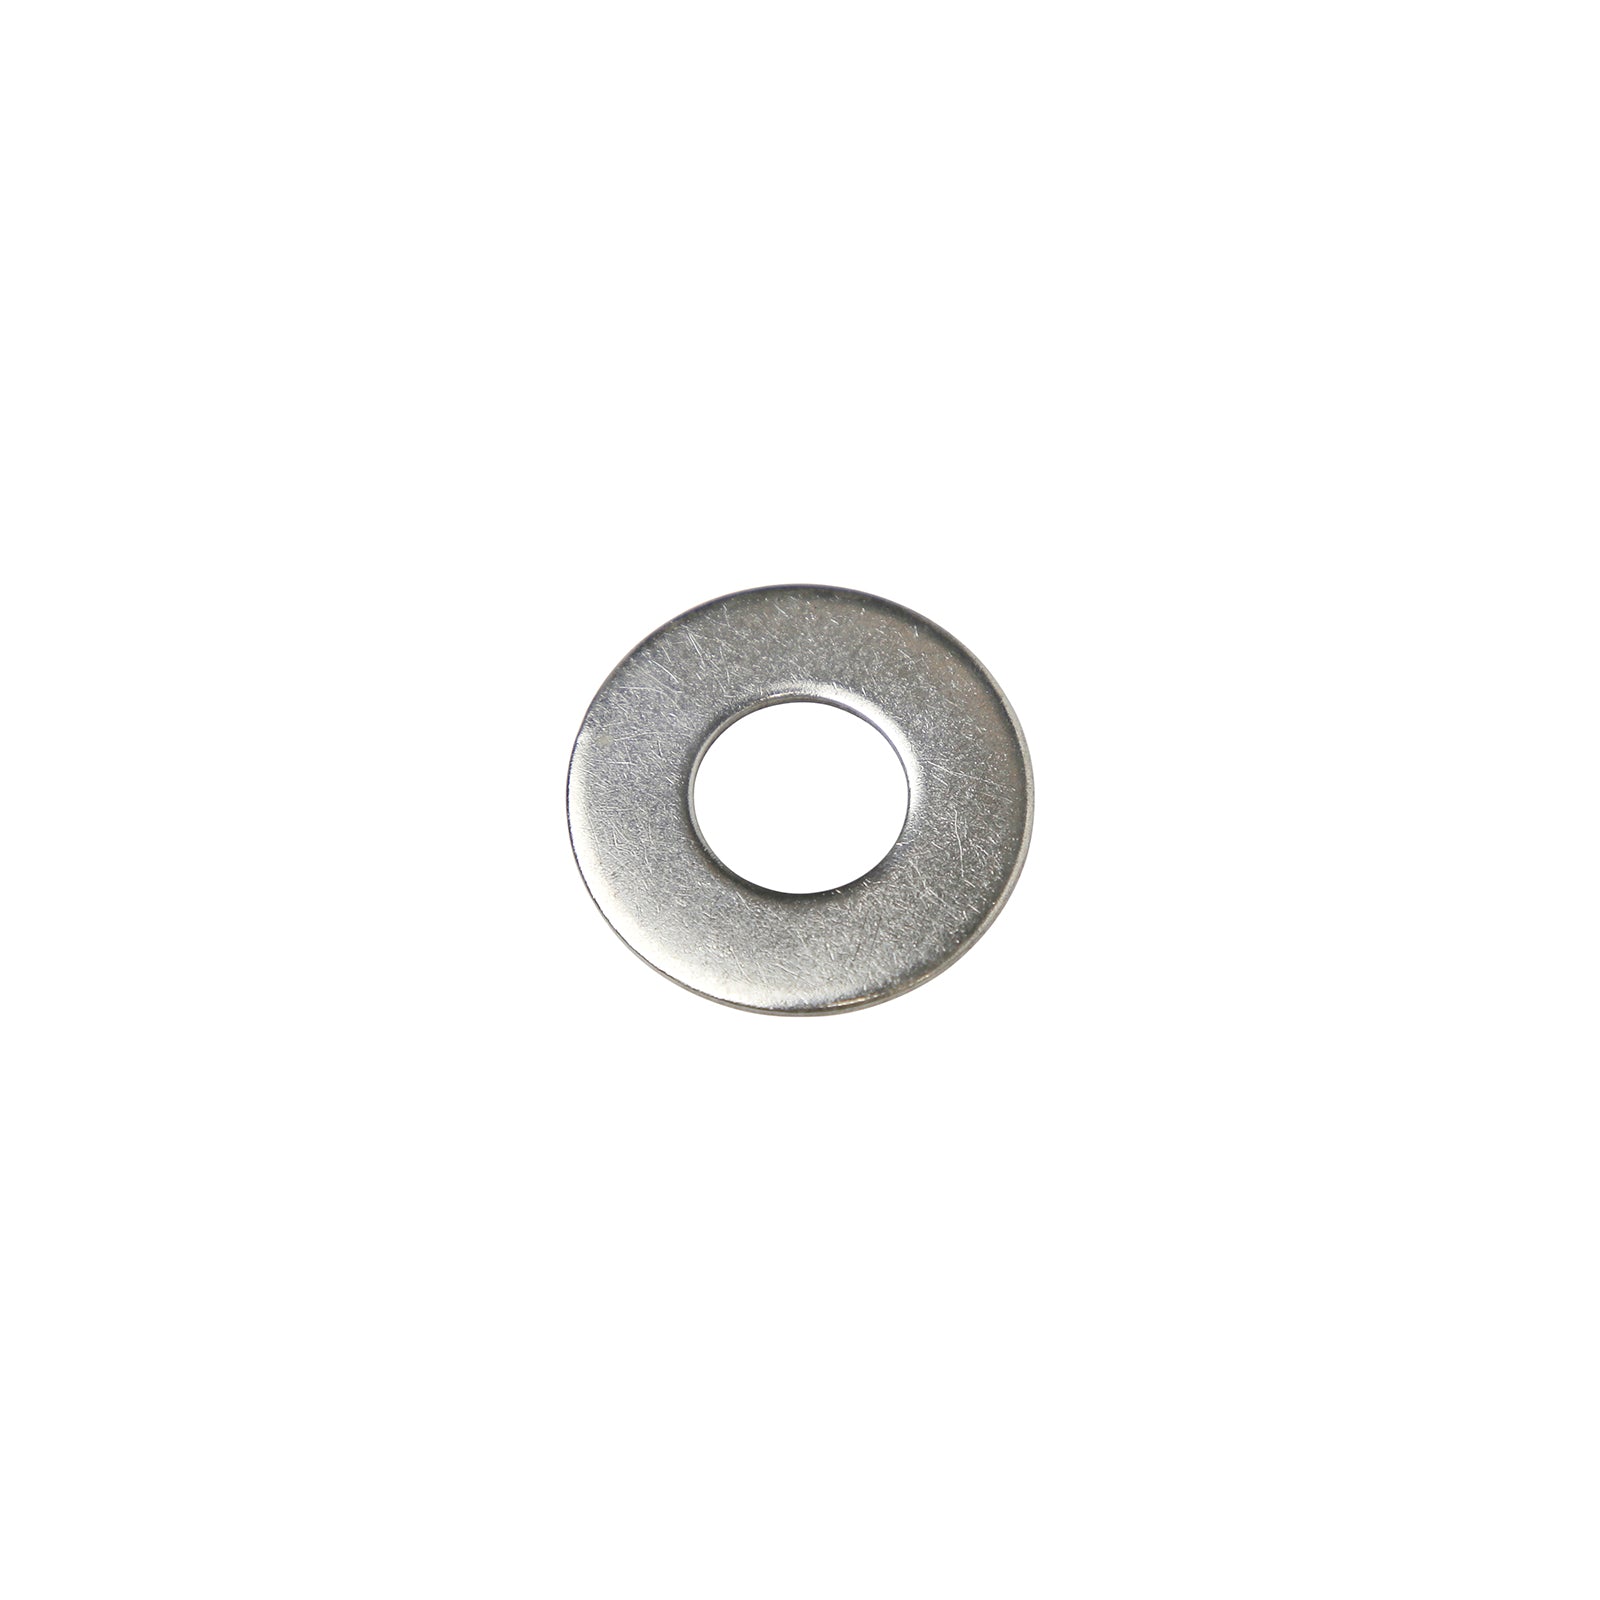 1/2" Conquest SAE Flat Washer - 304 Stainless Steel